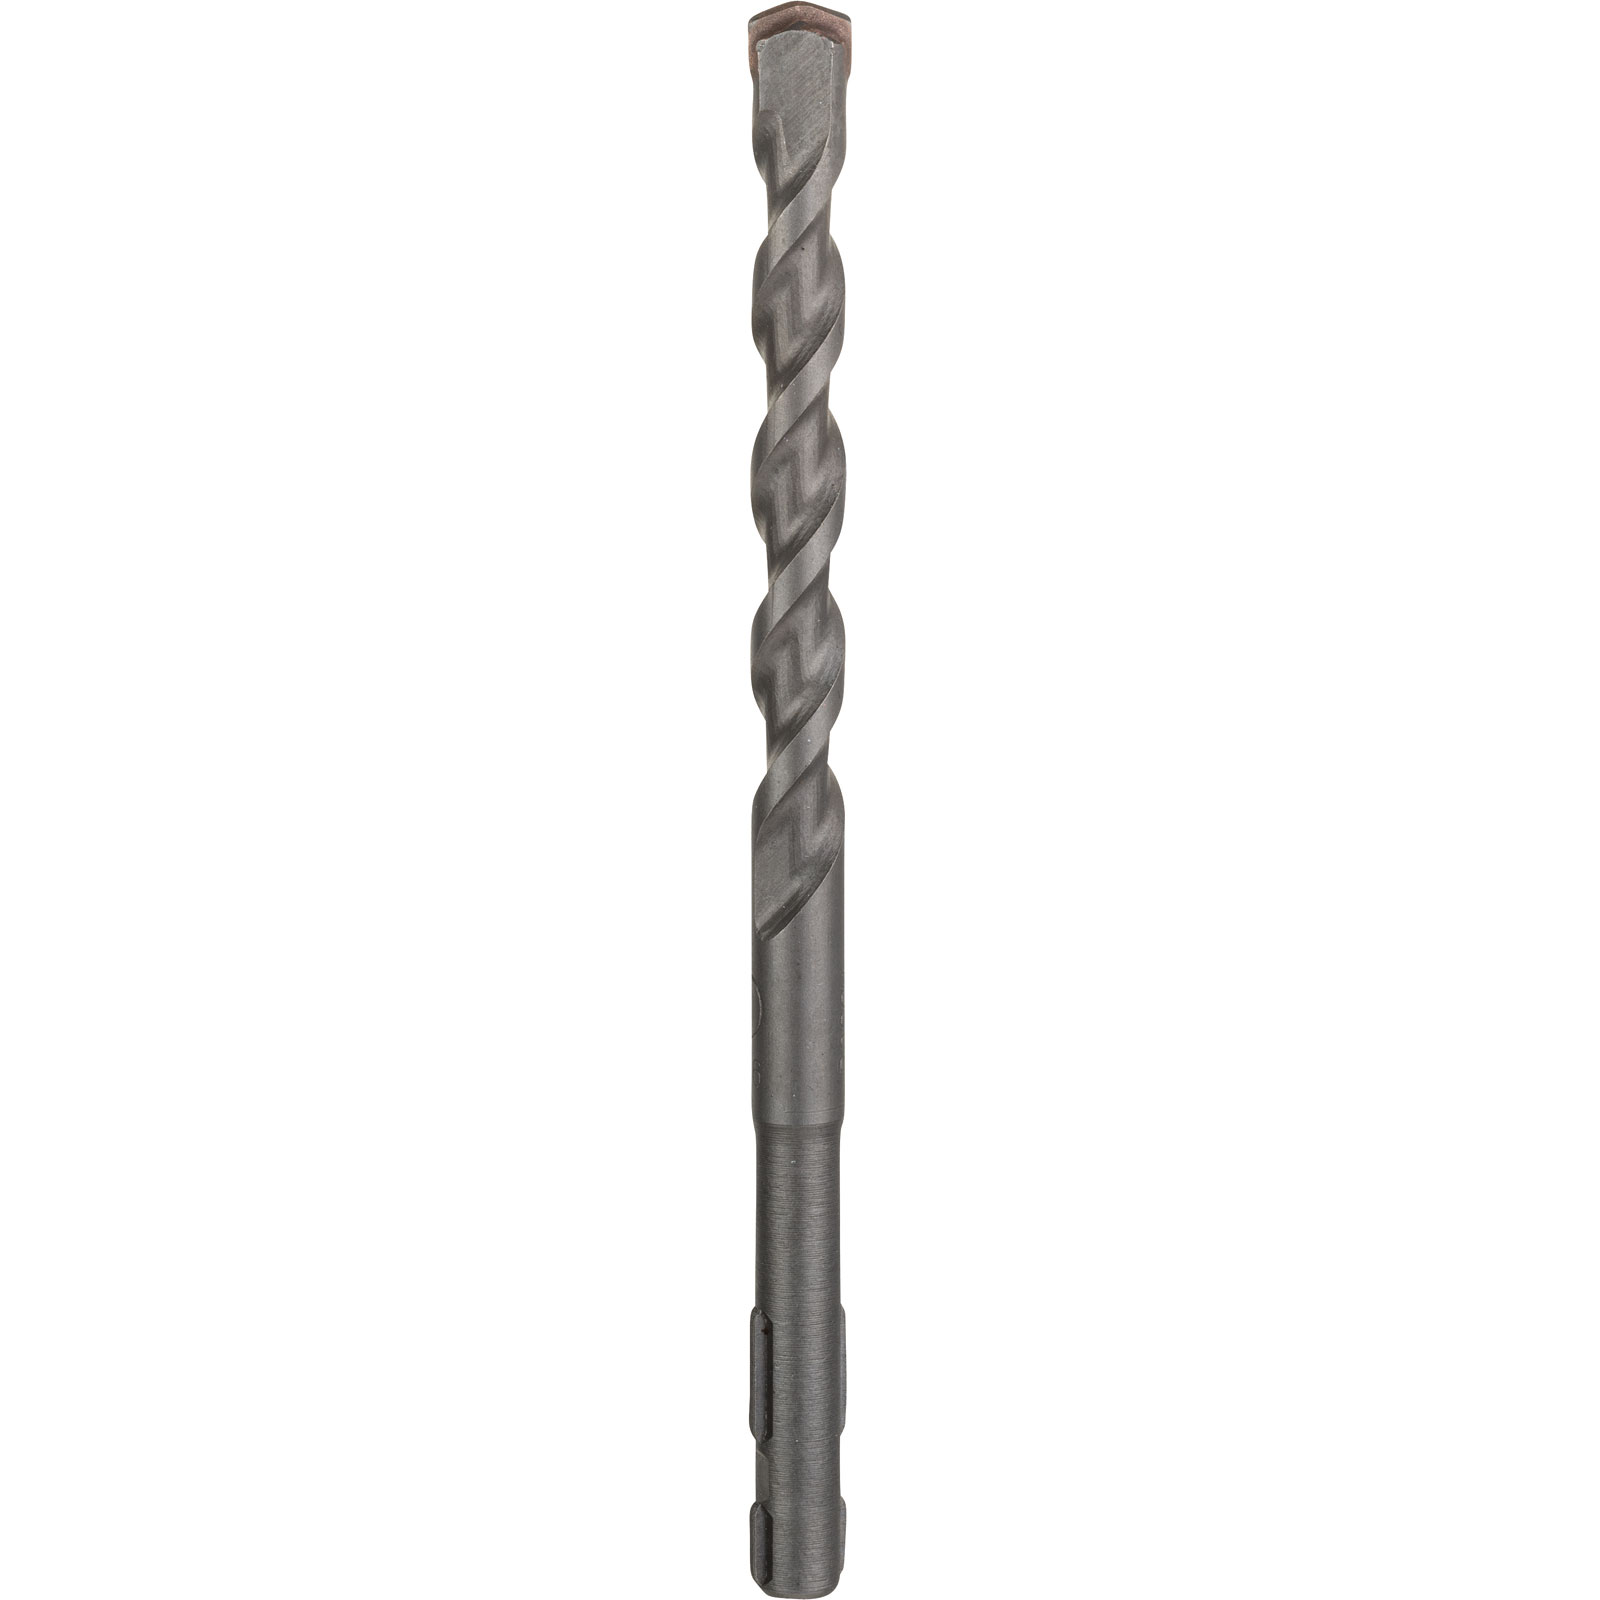 Photo of Bosch Uneo Sds Quick Masonary Drill Bit 8mm 120mm Pack Of 1